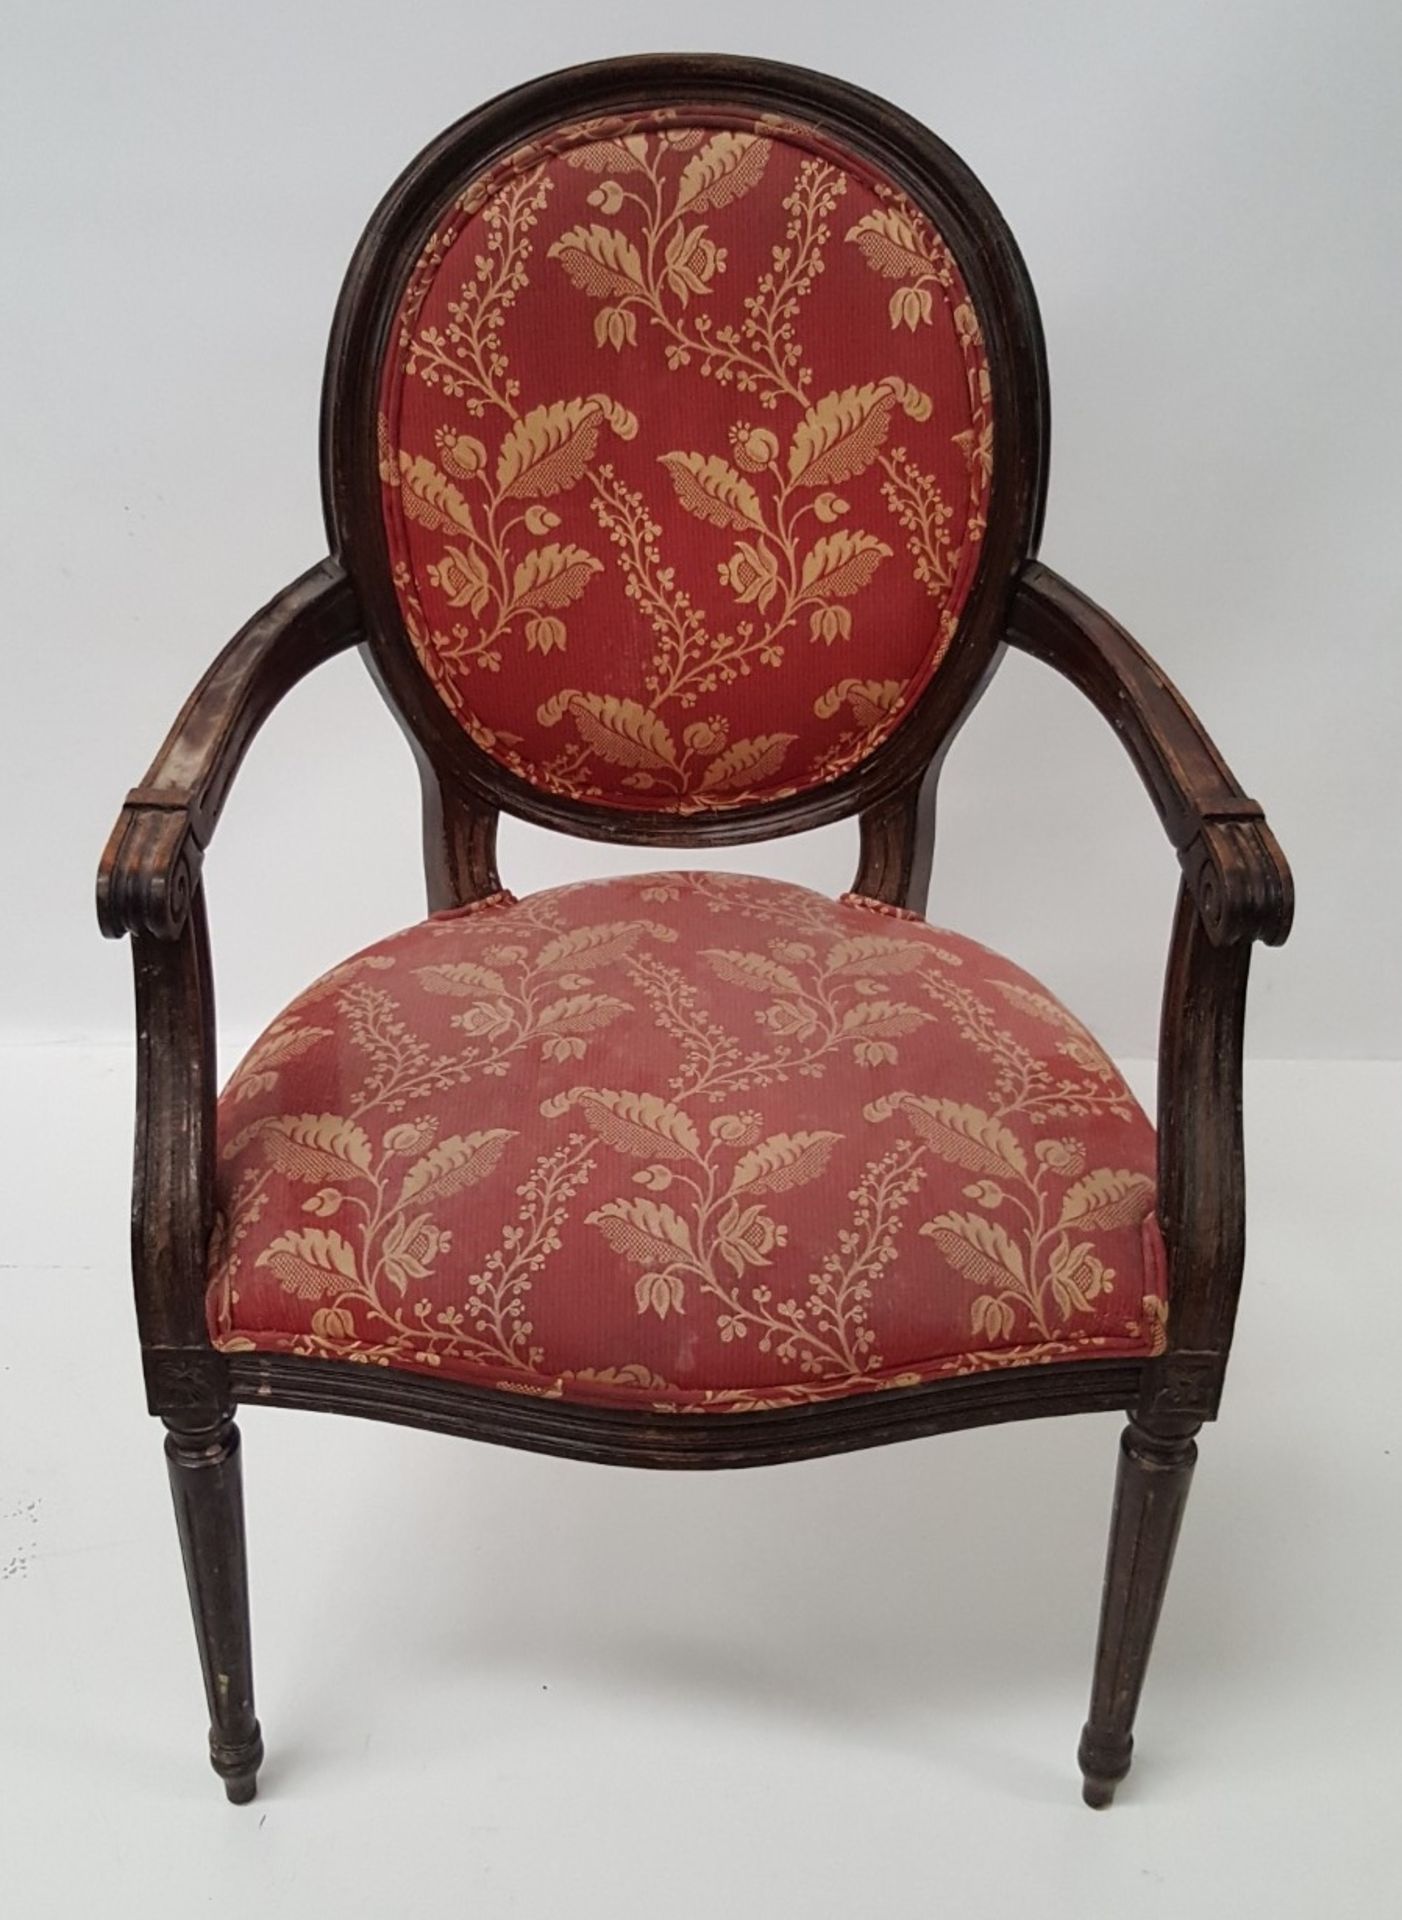 6 x Antique Style Wooden Chairs Upholstered In Red Fabric With Gold Leaf Design - CL431 - Image 2 of 8